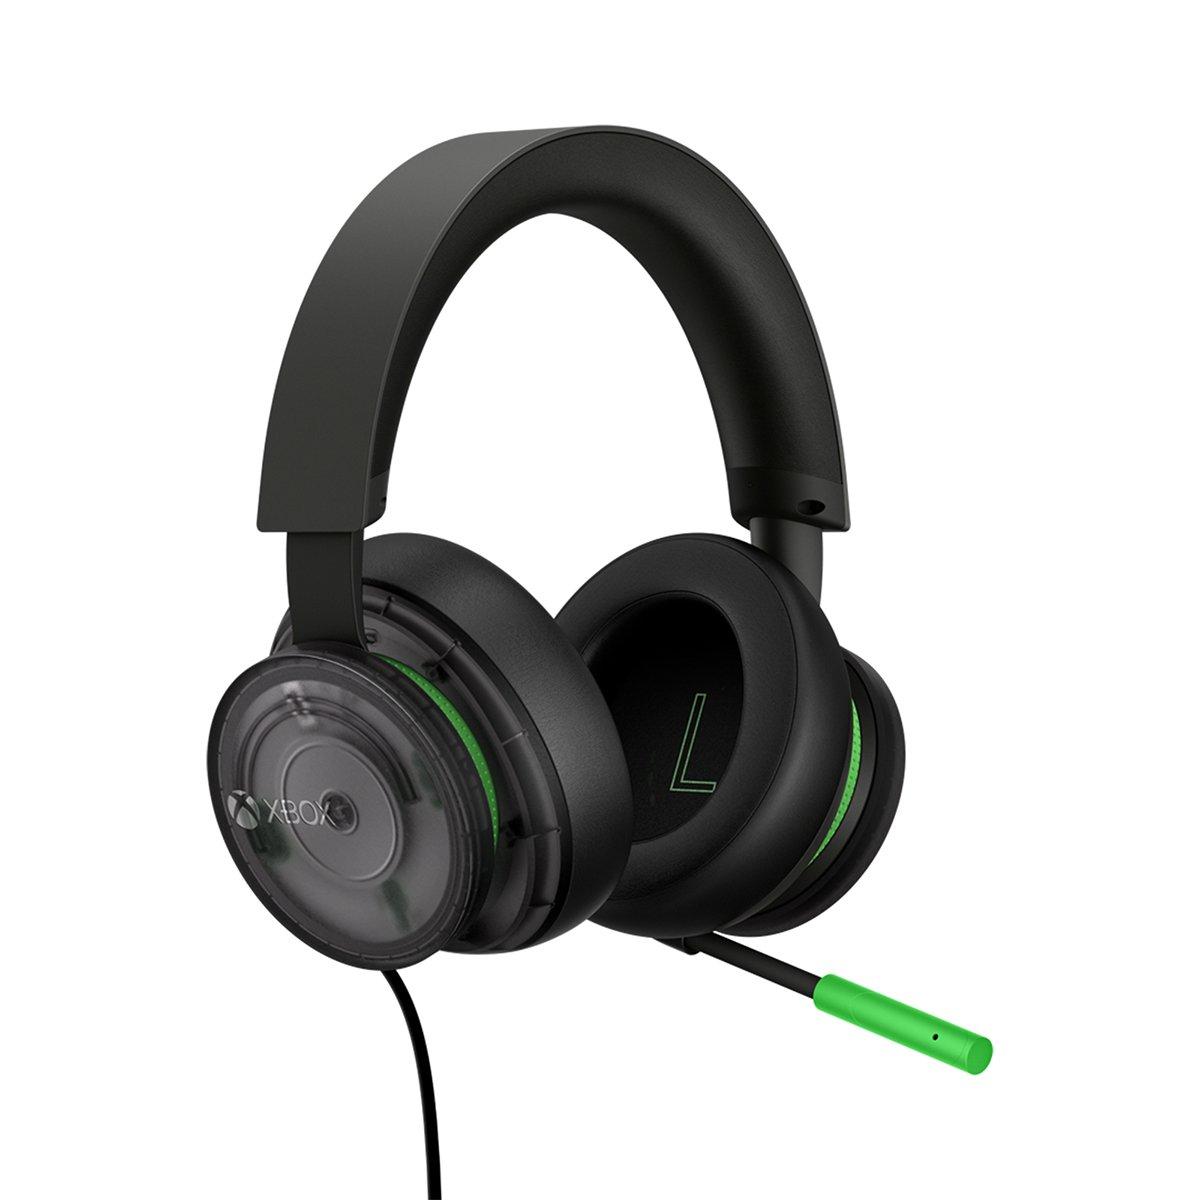 Microsoft Wired Stereo Headset for Xbox Series X 20th Anniversary